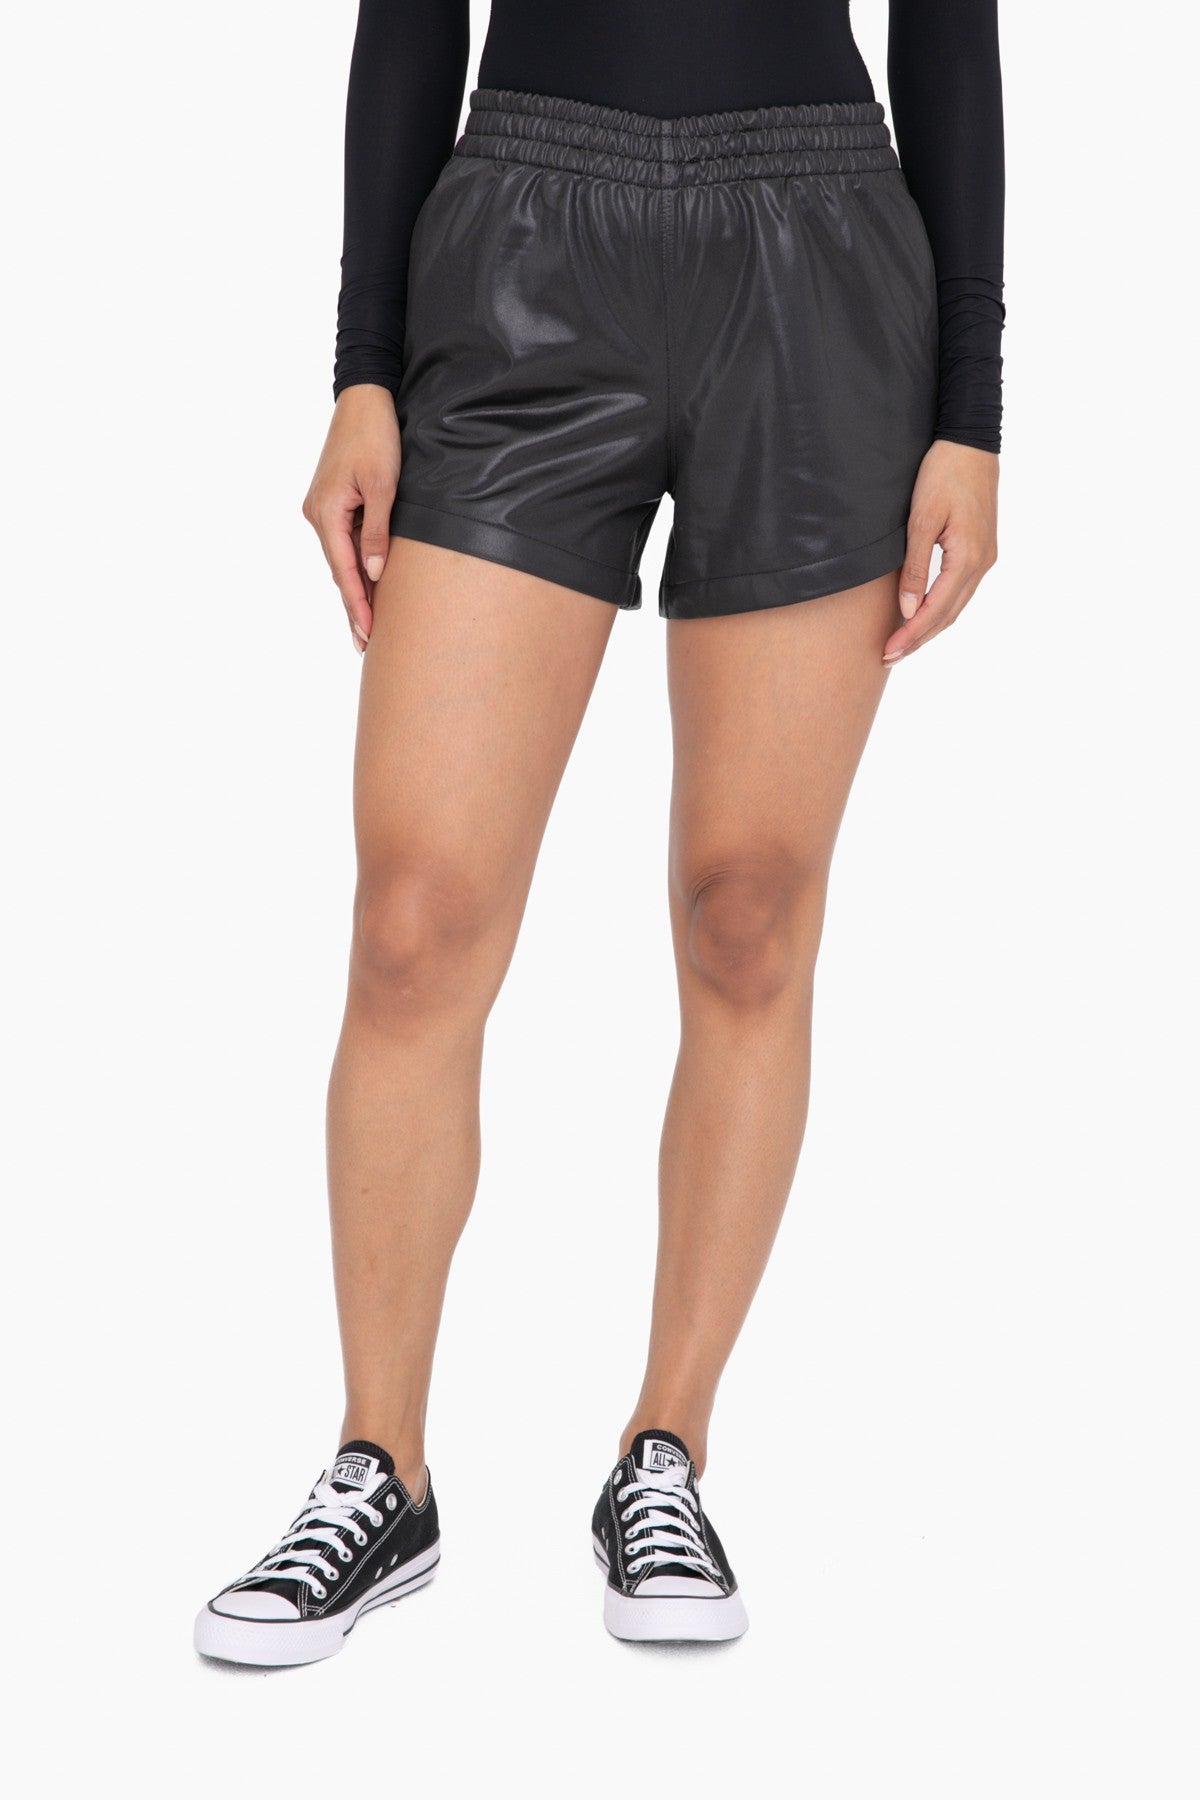 All I Do Is Win Glossy Shorts in Black